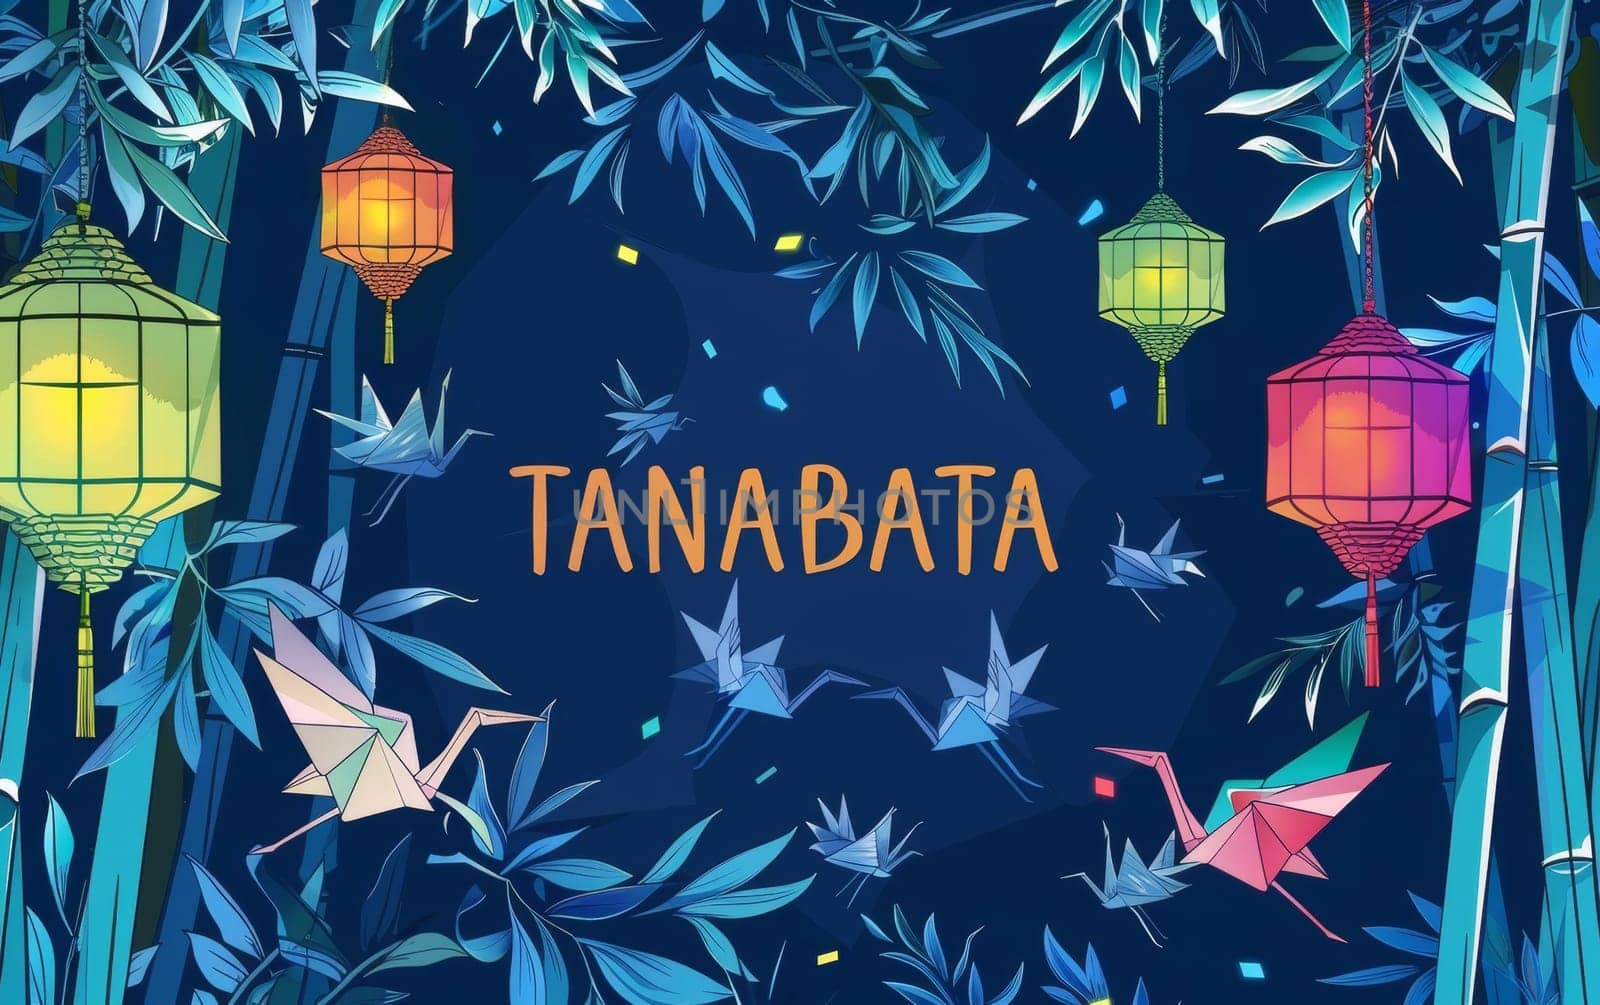 Festive paper lanterns and origami cranes set against a dark blue background celebrate Tanabata, Japans star festival, with a spirited and cultural charm. by sfinks